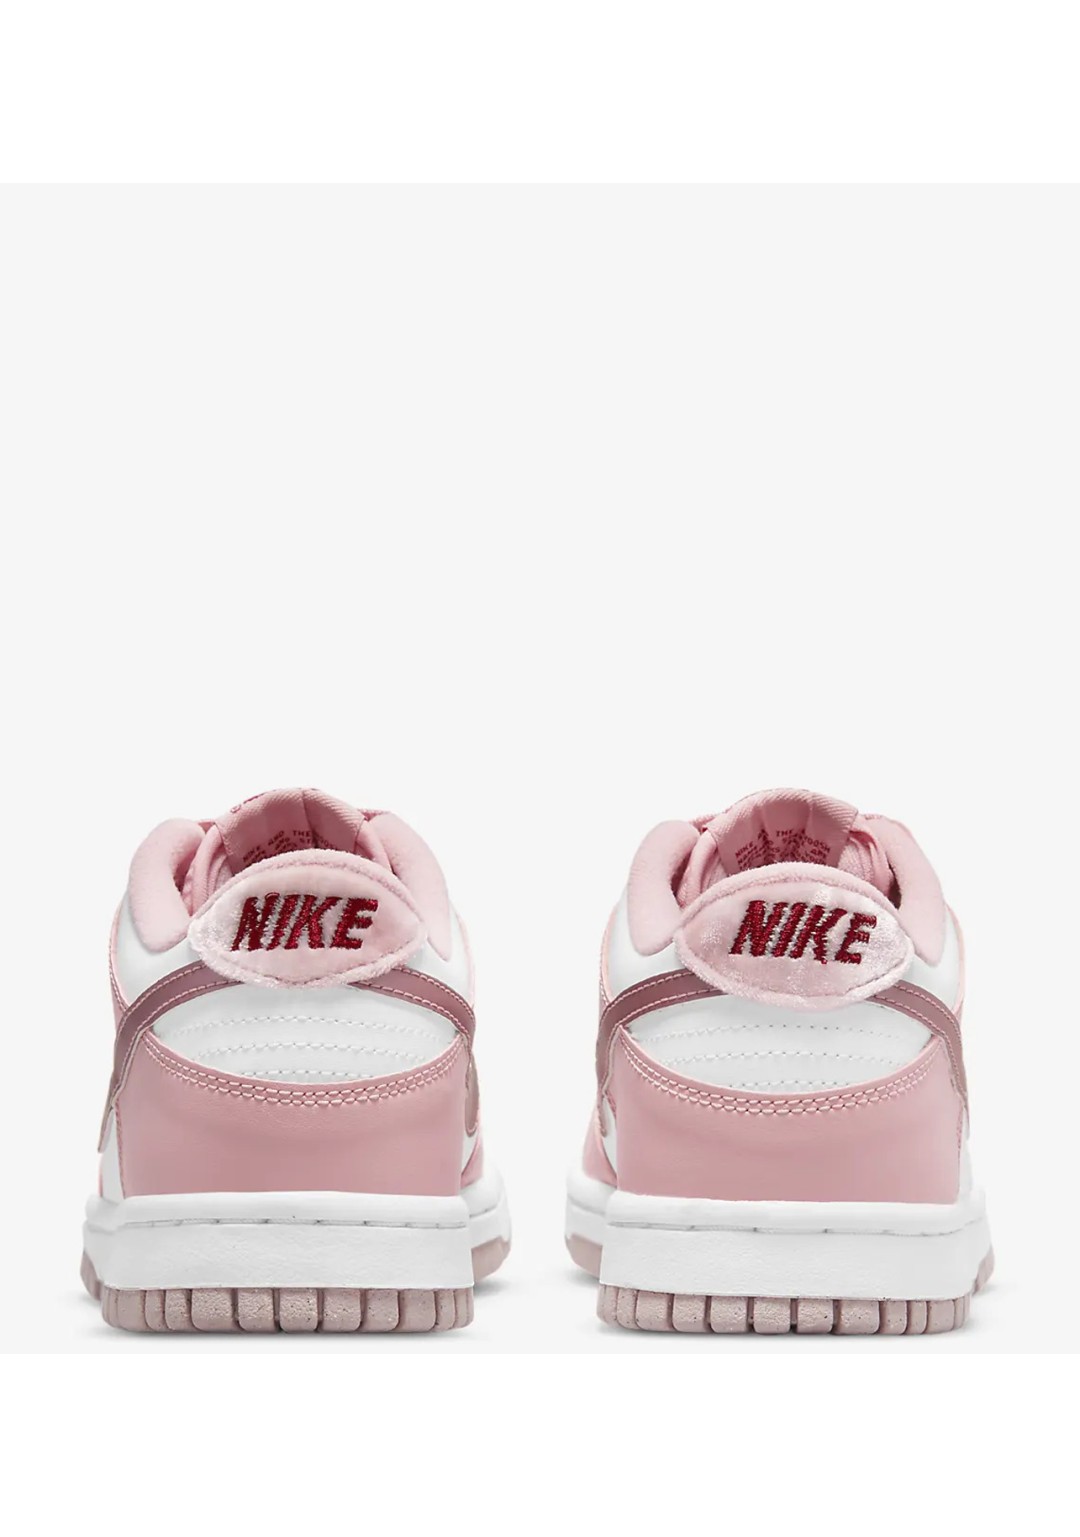 Nike - Dunk Low - Donna - DO6485 600